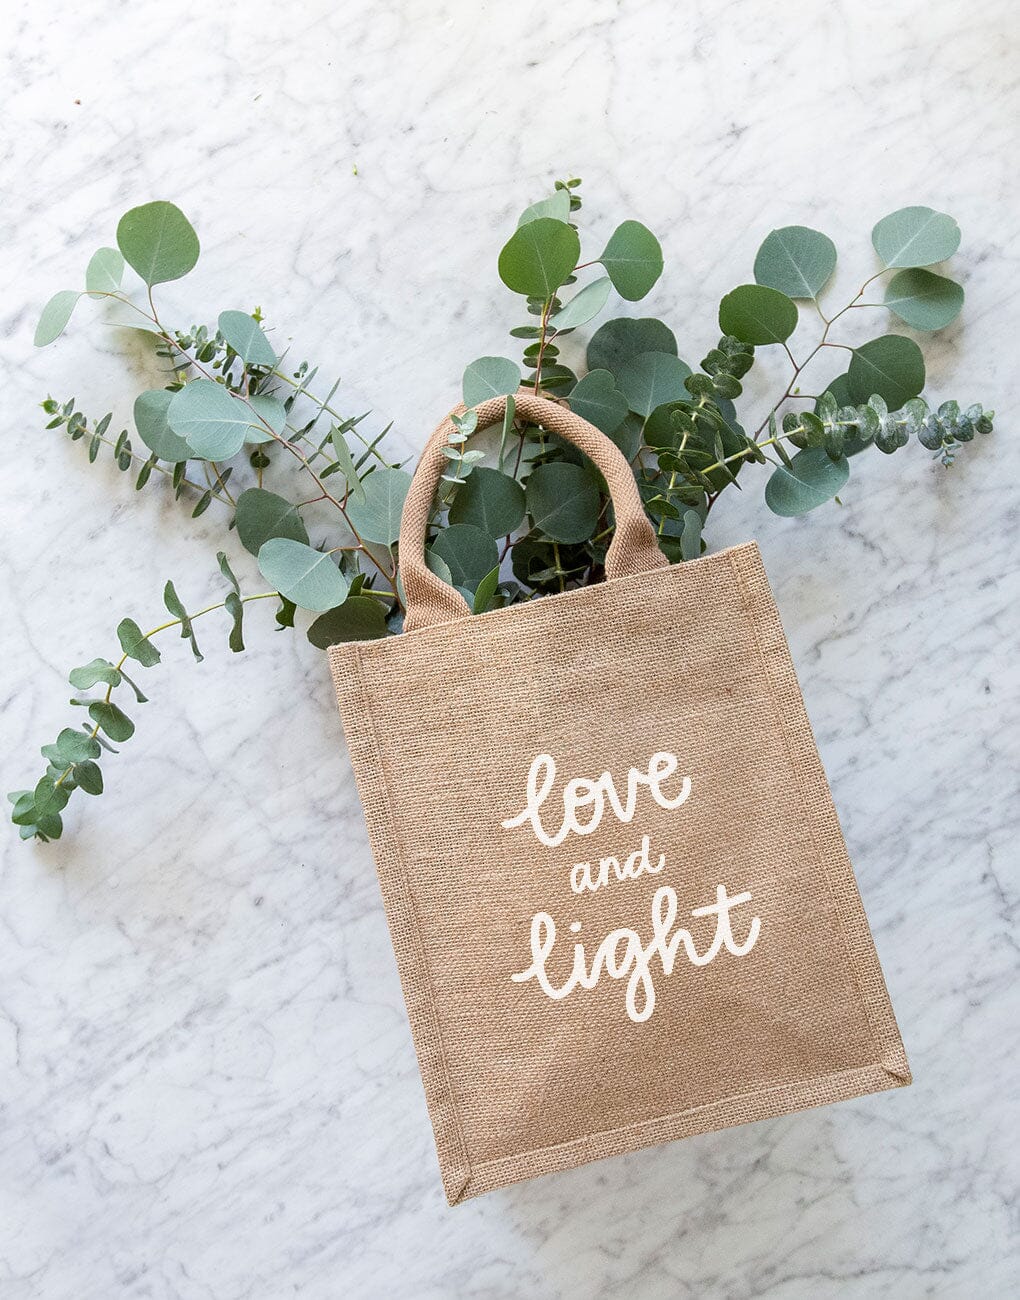 Medium Love And Light Reusable Gift Tote In White Font | The Little Market